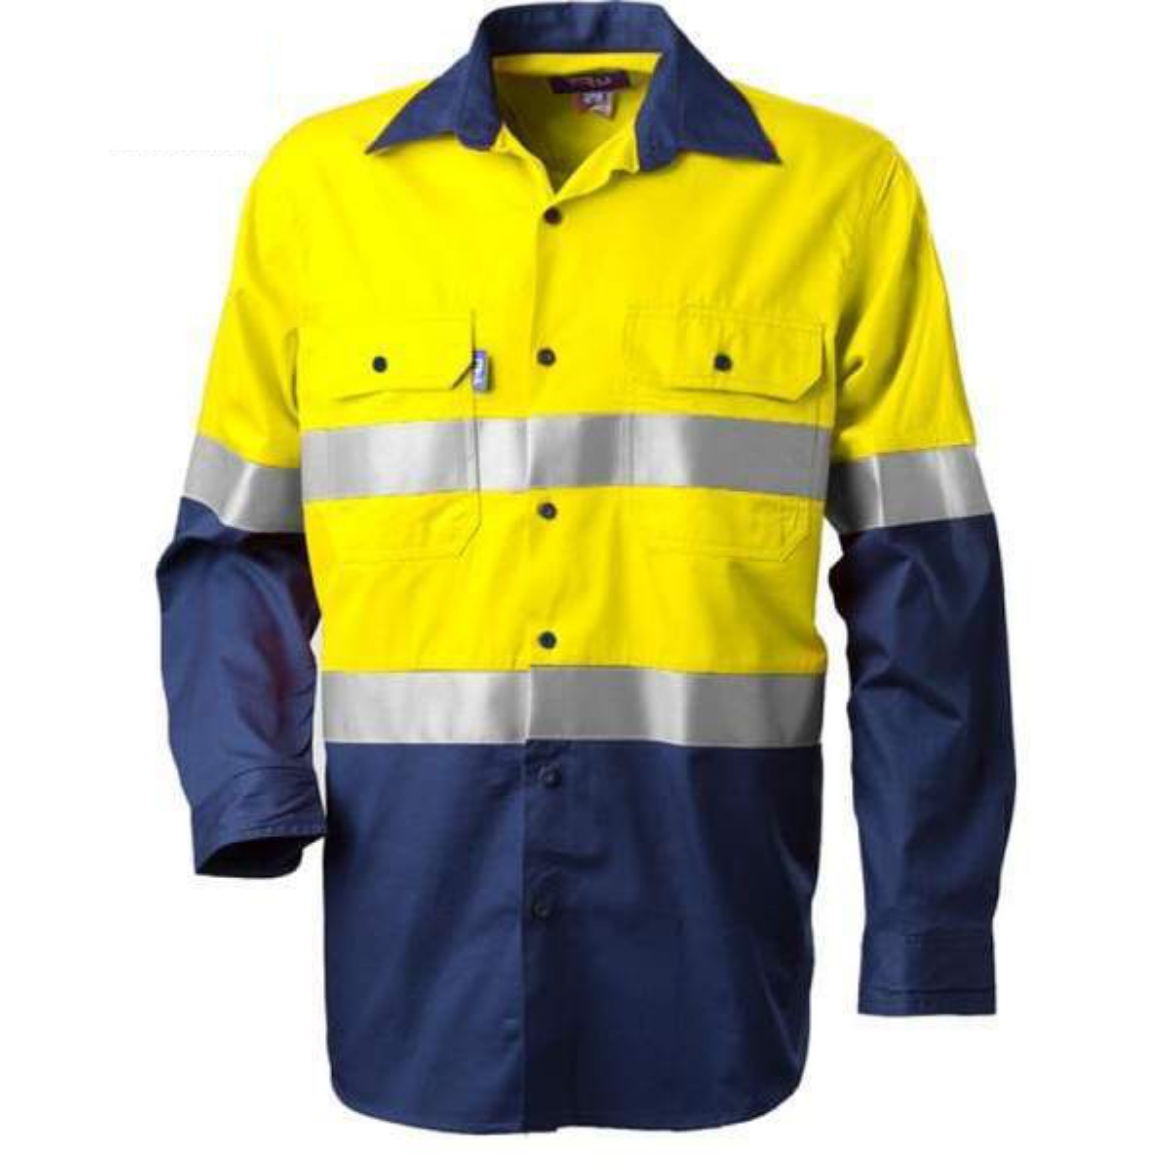 Picture of Tru Workwear, Shirt, Long Sleeve, Cotton Drill, 3M Tape